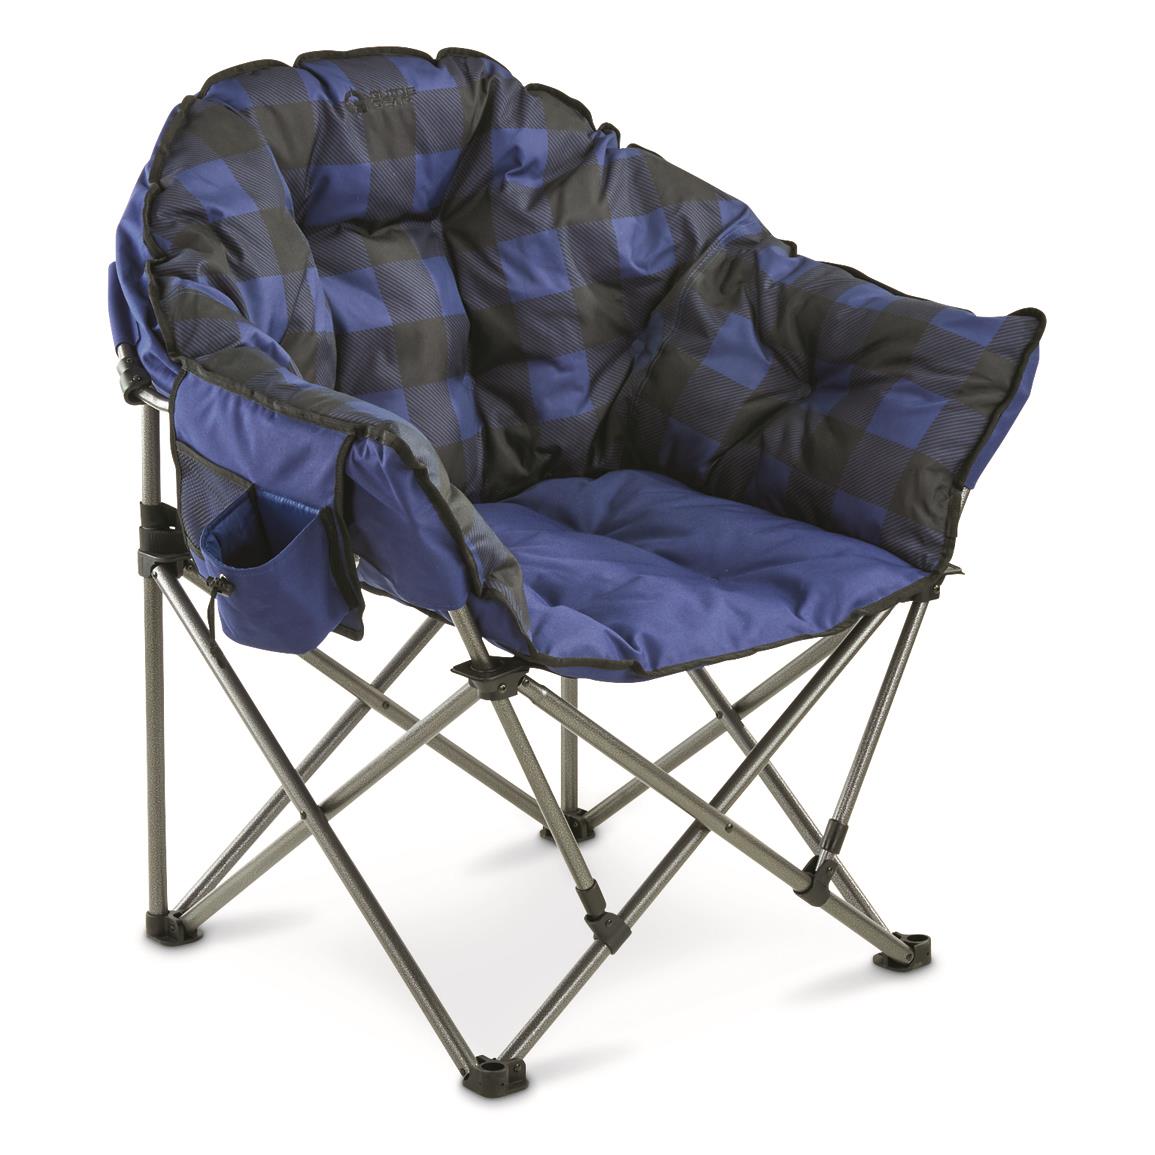 Guide Gear Oversized Club Camp Chair 500lb. Capacity Guide Gear